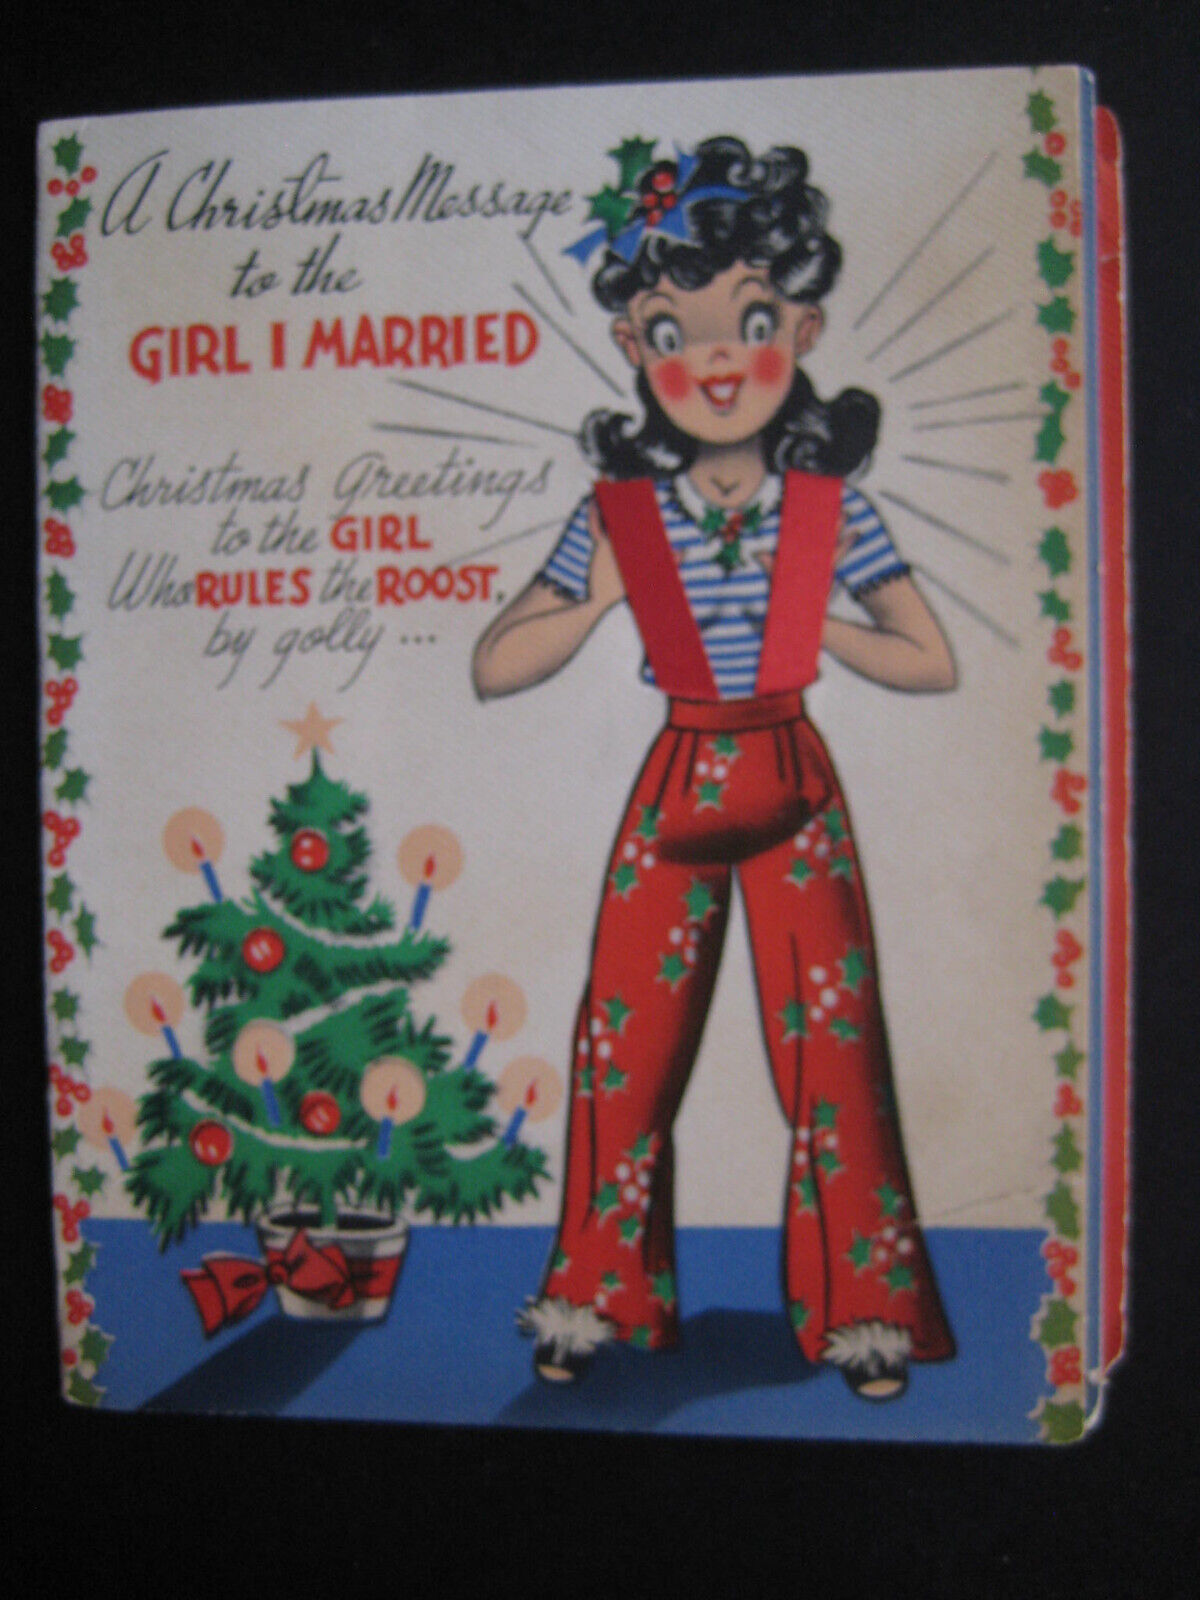 1950s Vintage Greeting Card Gibson Christmas To The Girl I Married, Multi-page